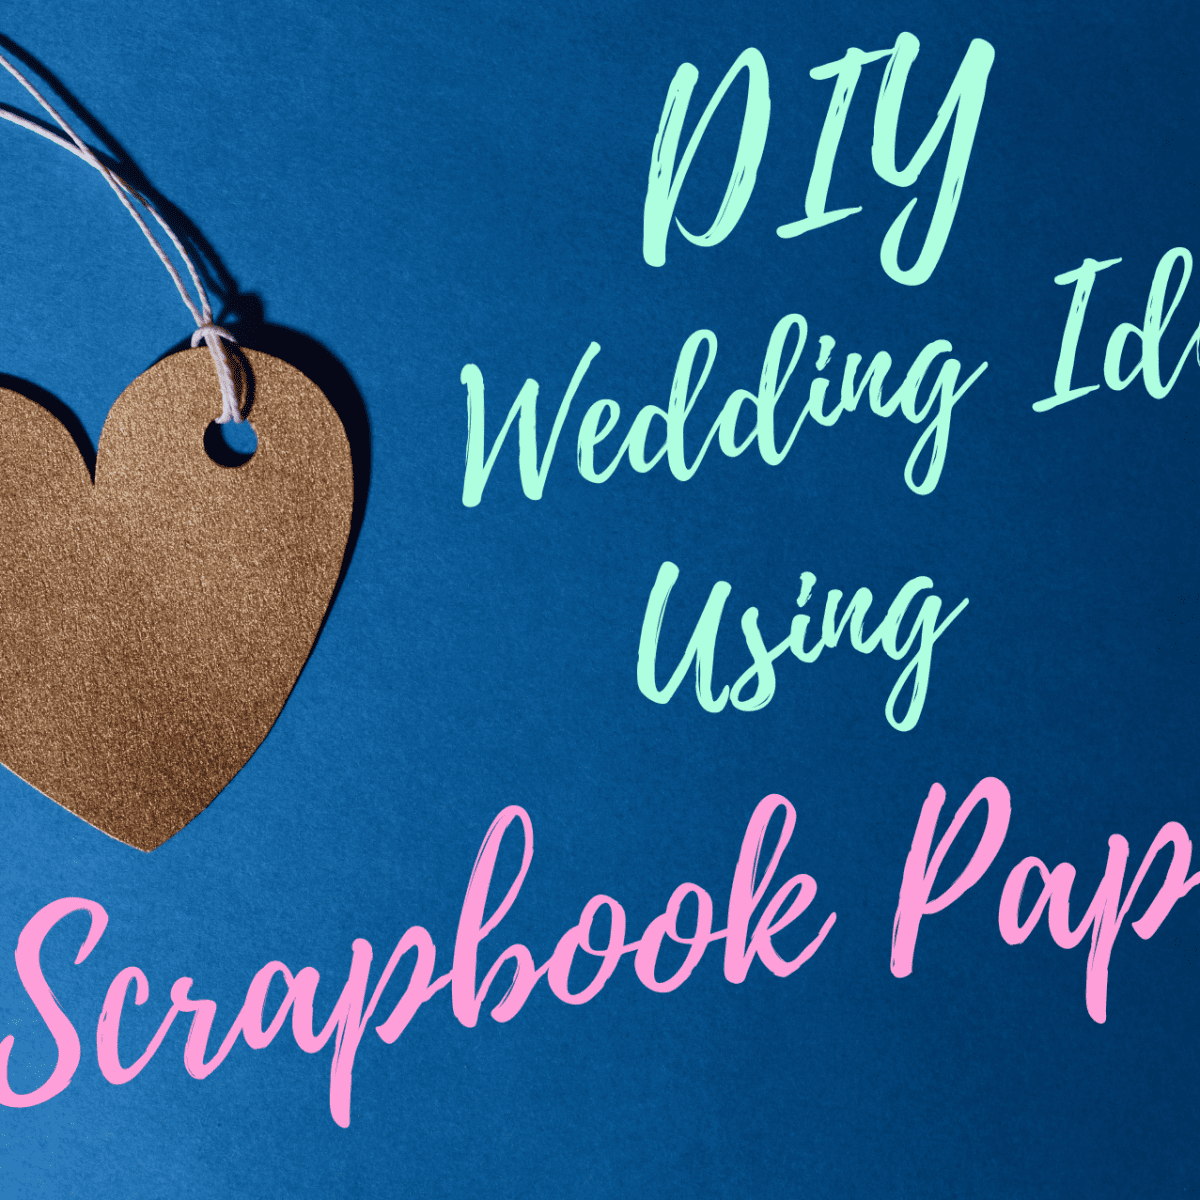 10 Great Ways to Use Scrapbook Paper for Your DIY Budget Wedding - HubPages